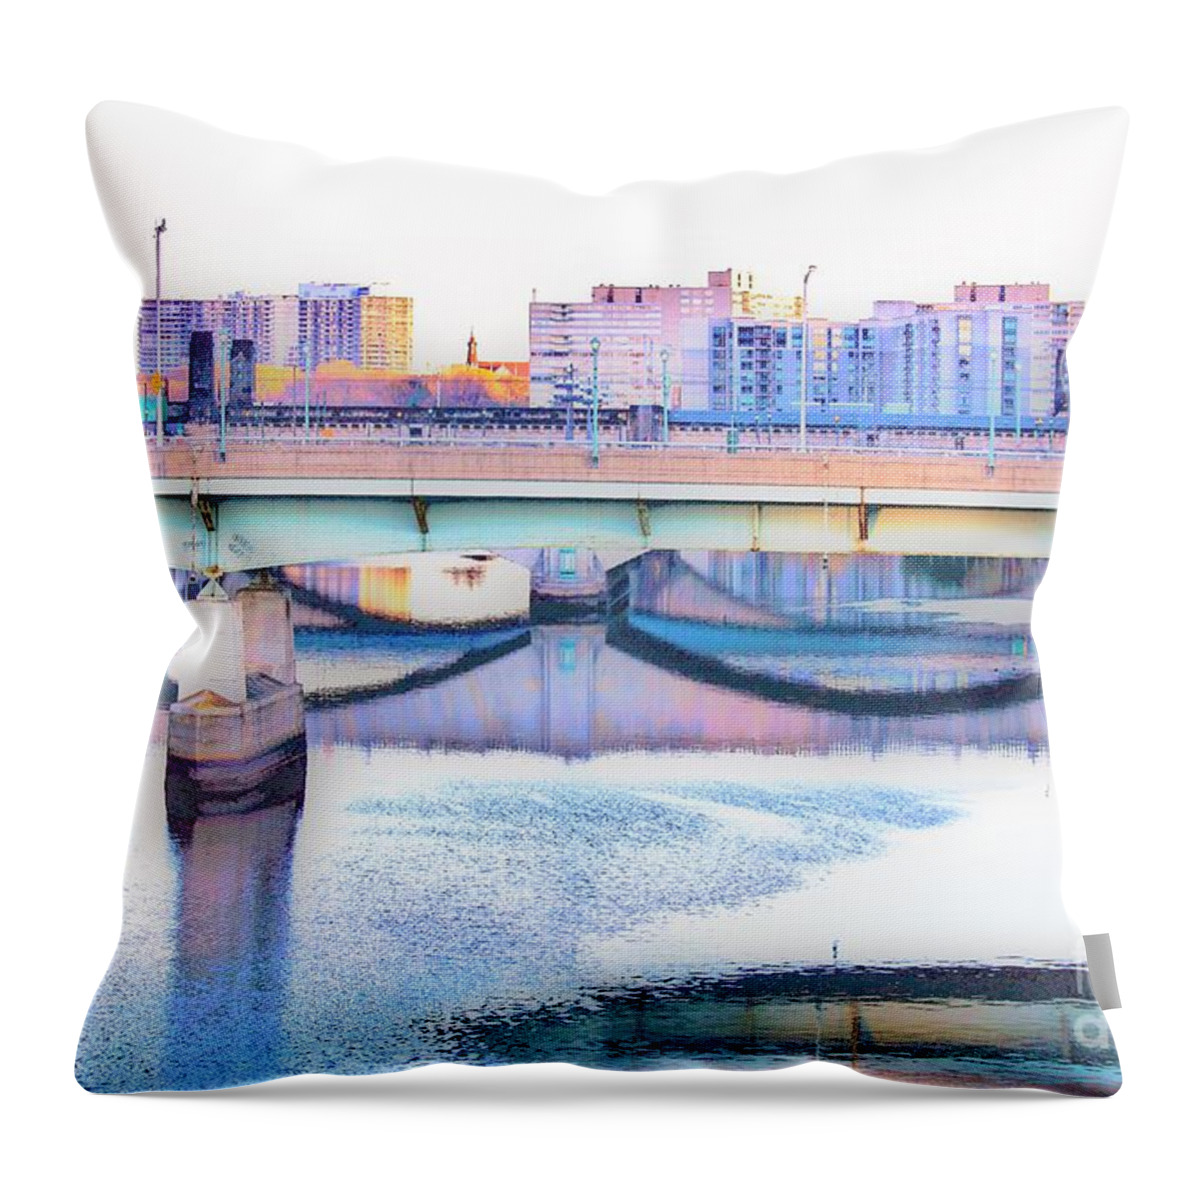 I Went For A Early Morning Walk And Came Across This Scene In Philadelphia. I Liked The Colors And Reflections Off The Water. This Is Another Version Of The Scene. Throw Pillow featuring the photograph Philadelphia Scene1 by Merle Grenz